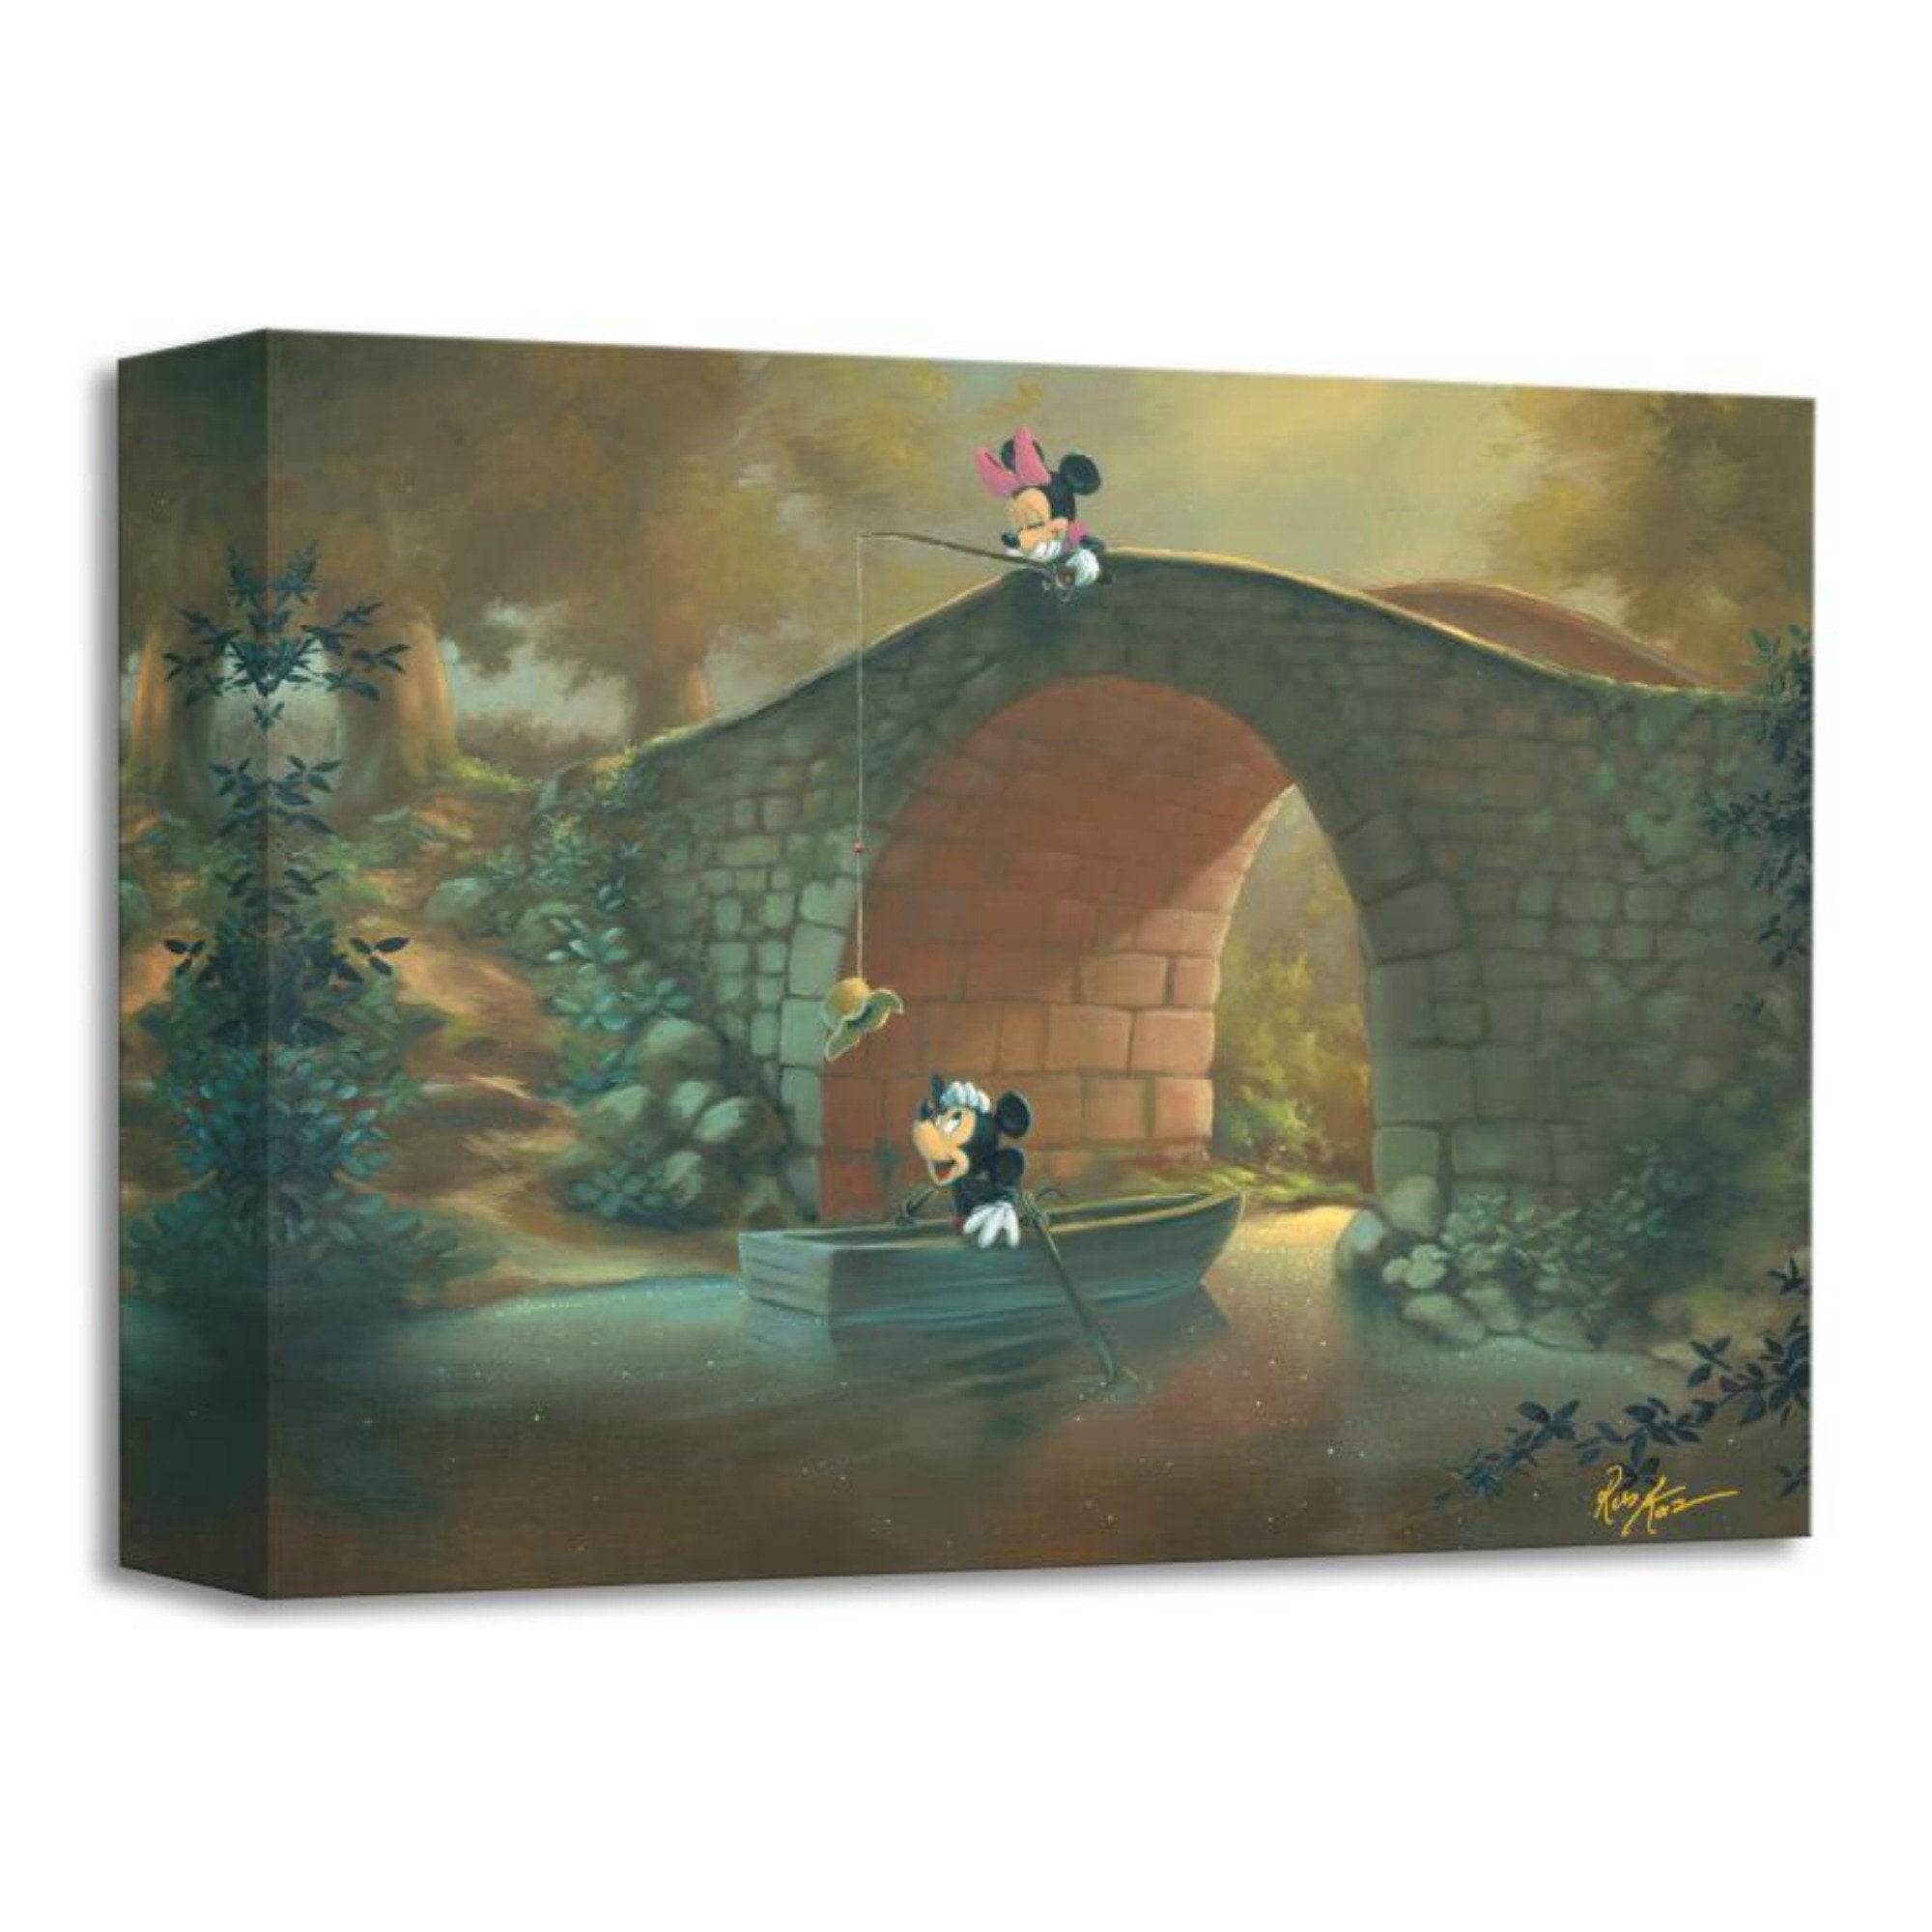 Hooked On You by Rob Kaz.  Minnie surprises Mickey as she catches his hat with her fishing pole from on top of the bridge. 